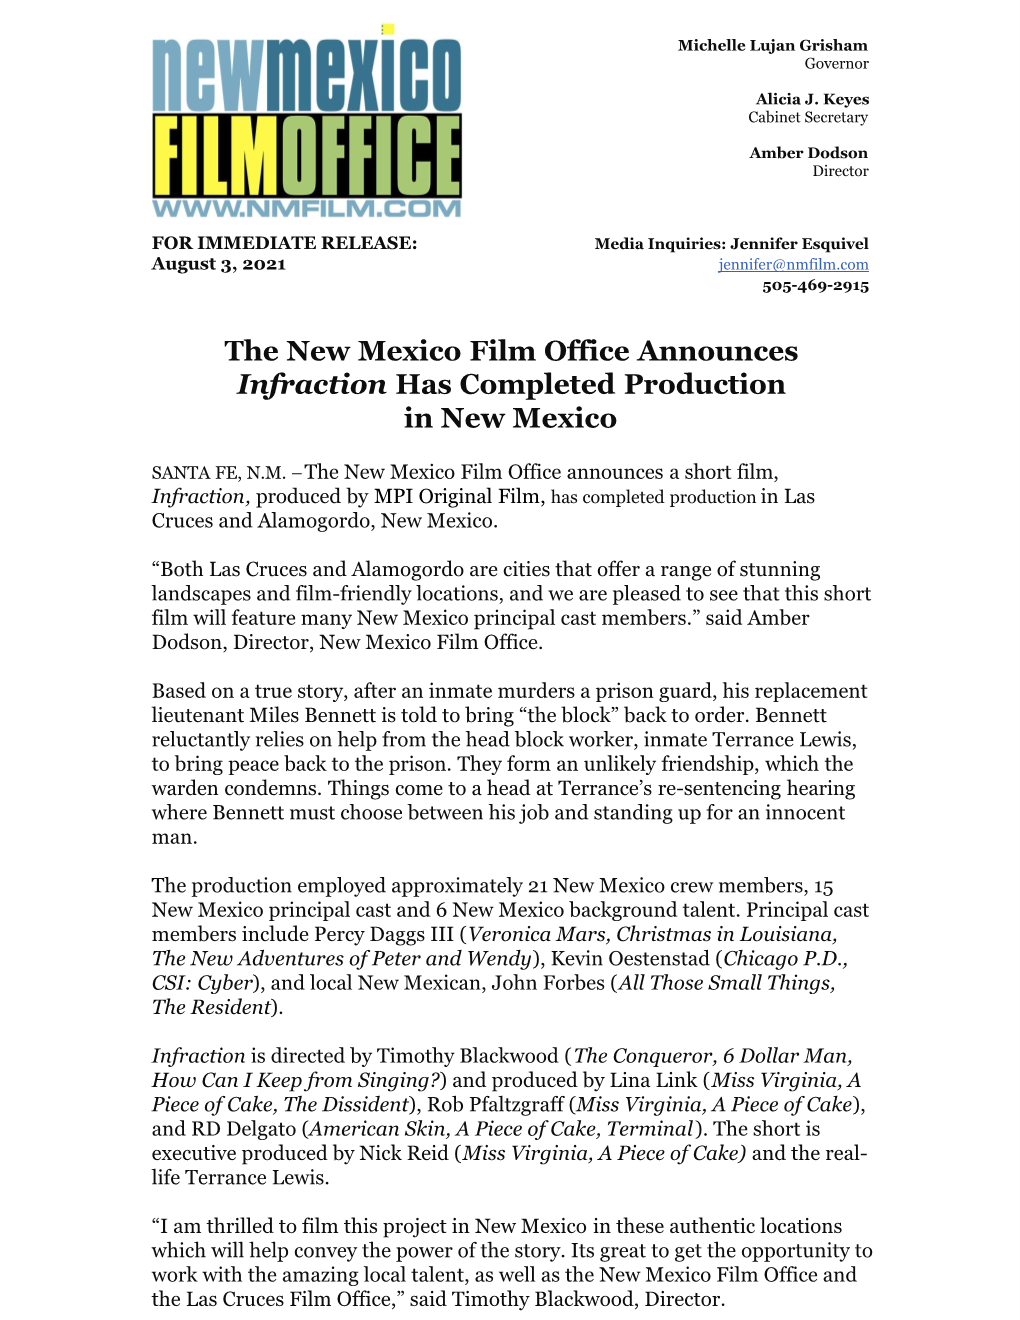 The New Mexico Film Office Announces Infraction Has Completed Production In​ New Mexico